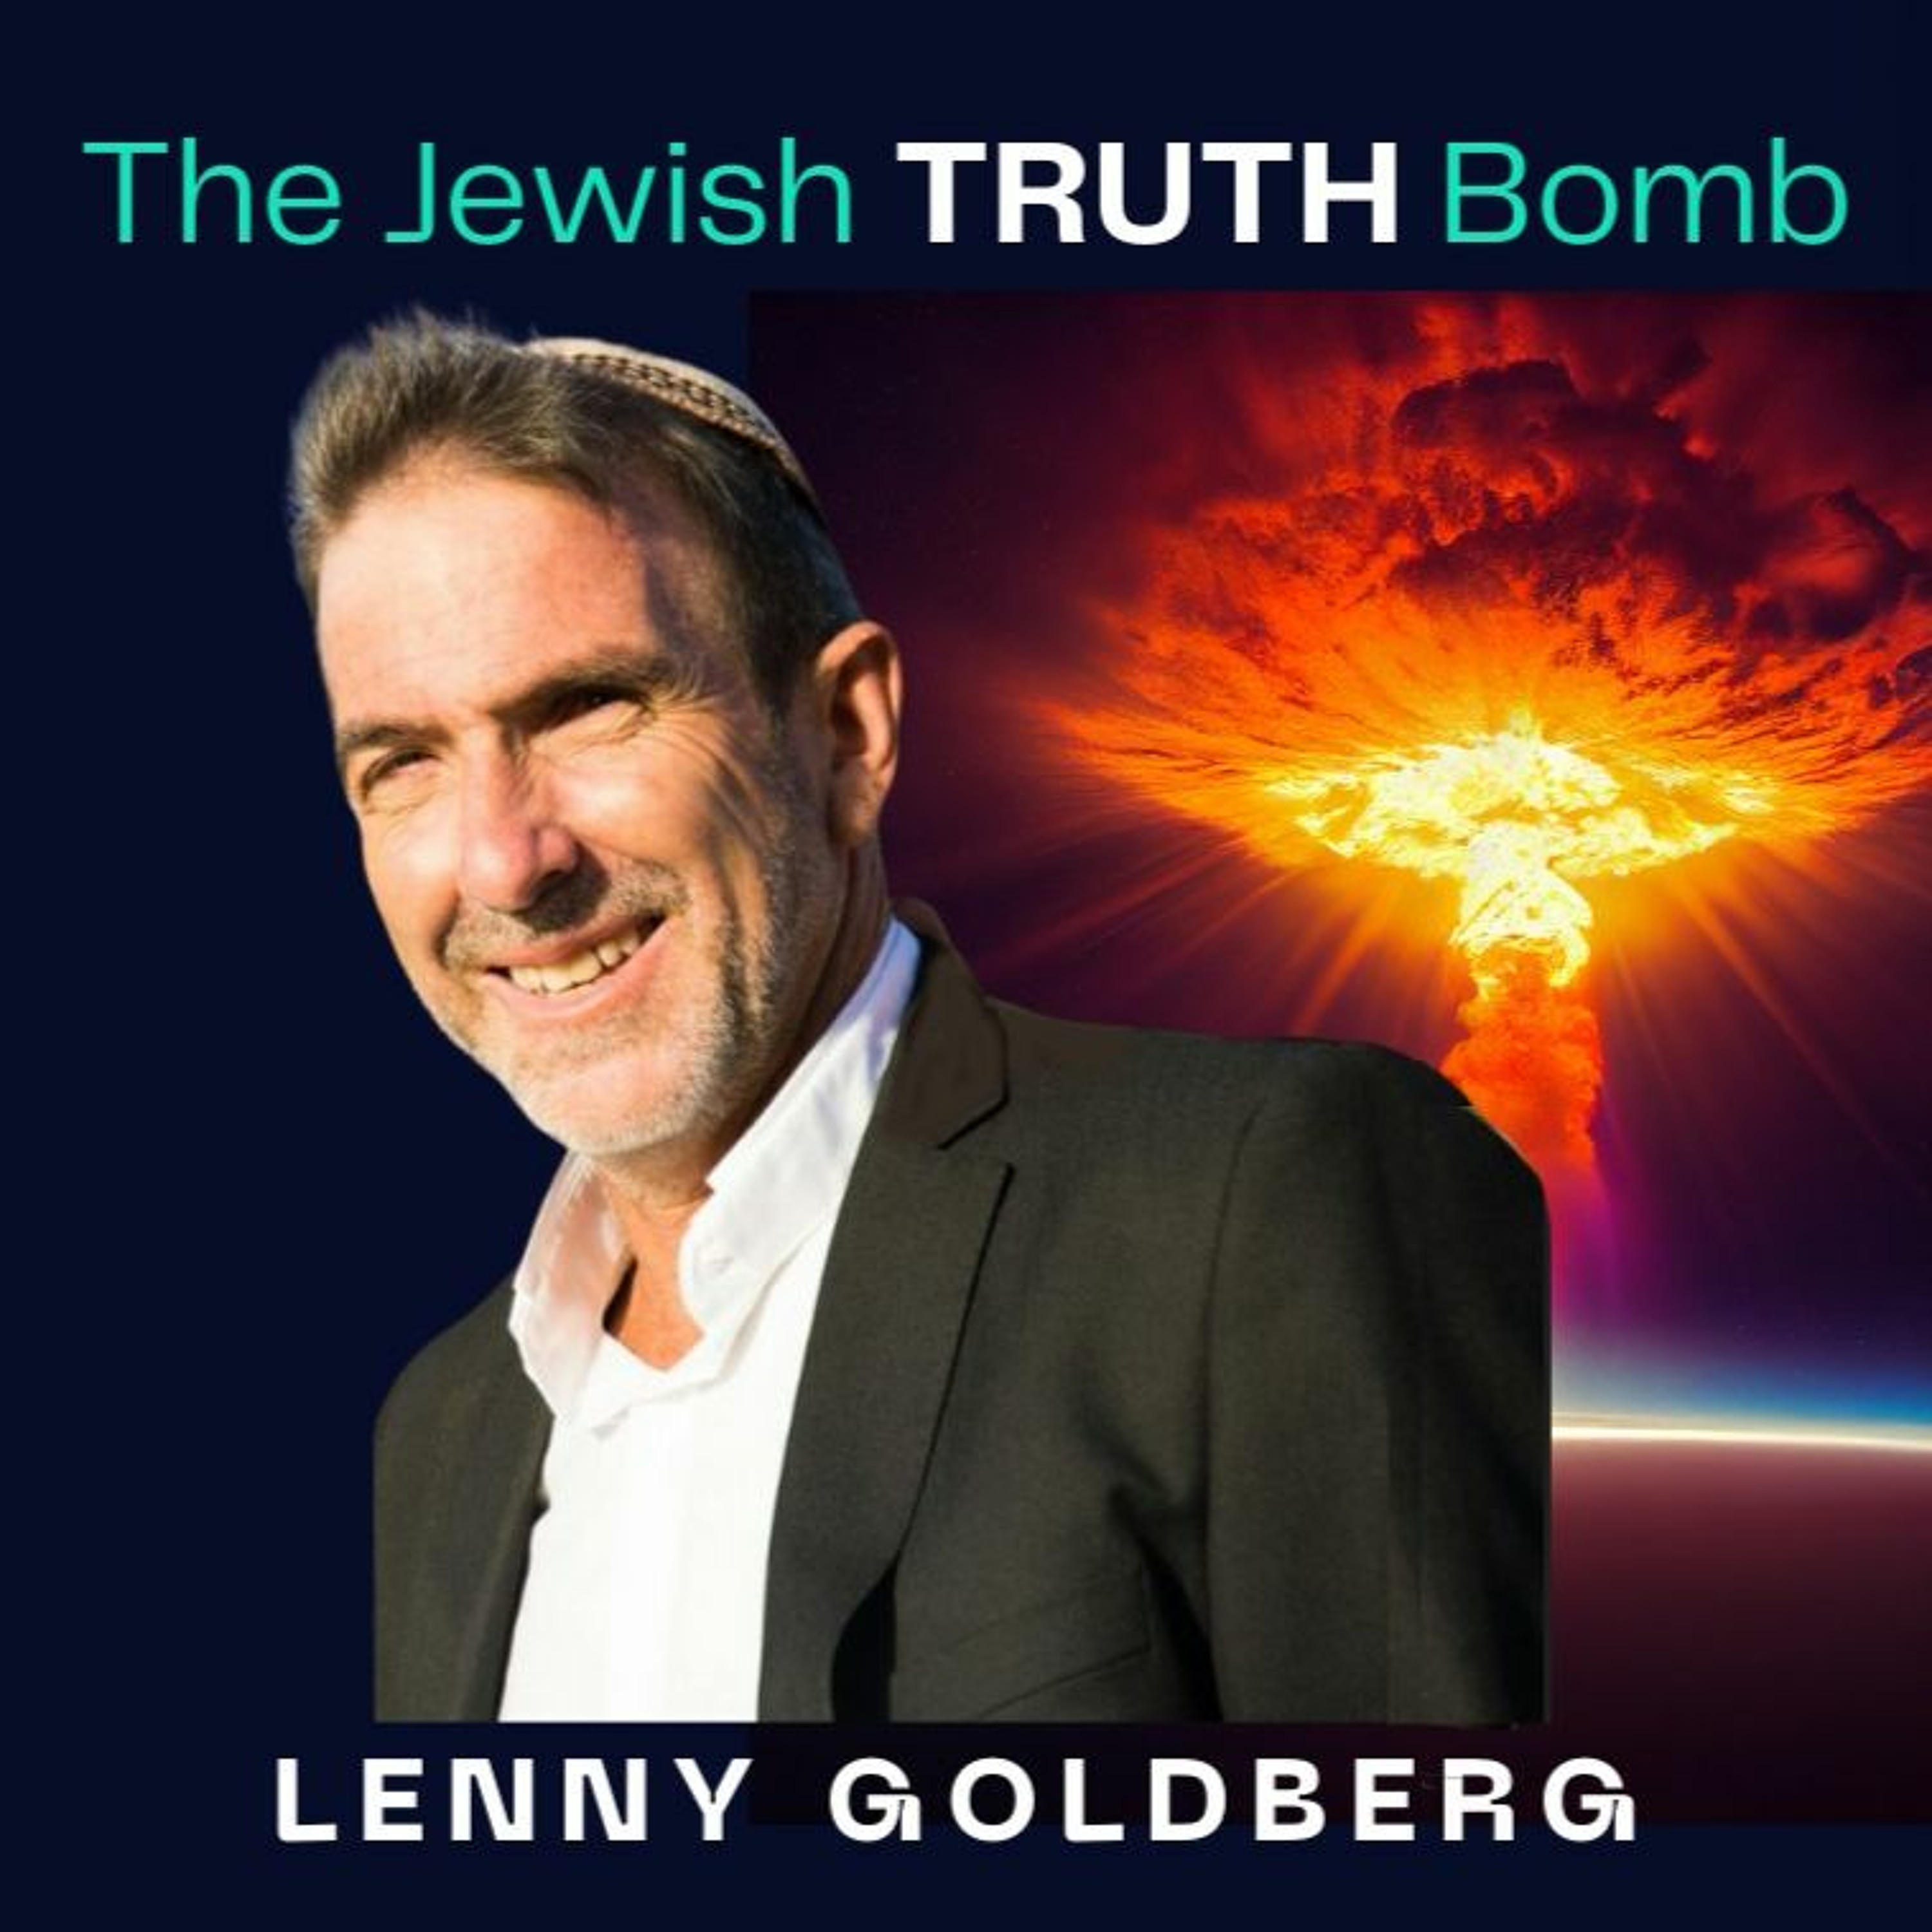 Yair Stern and Meir Kahane - Persecuted Men of Truth - The Jewish Truth Bomb